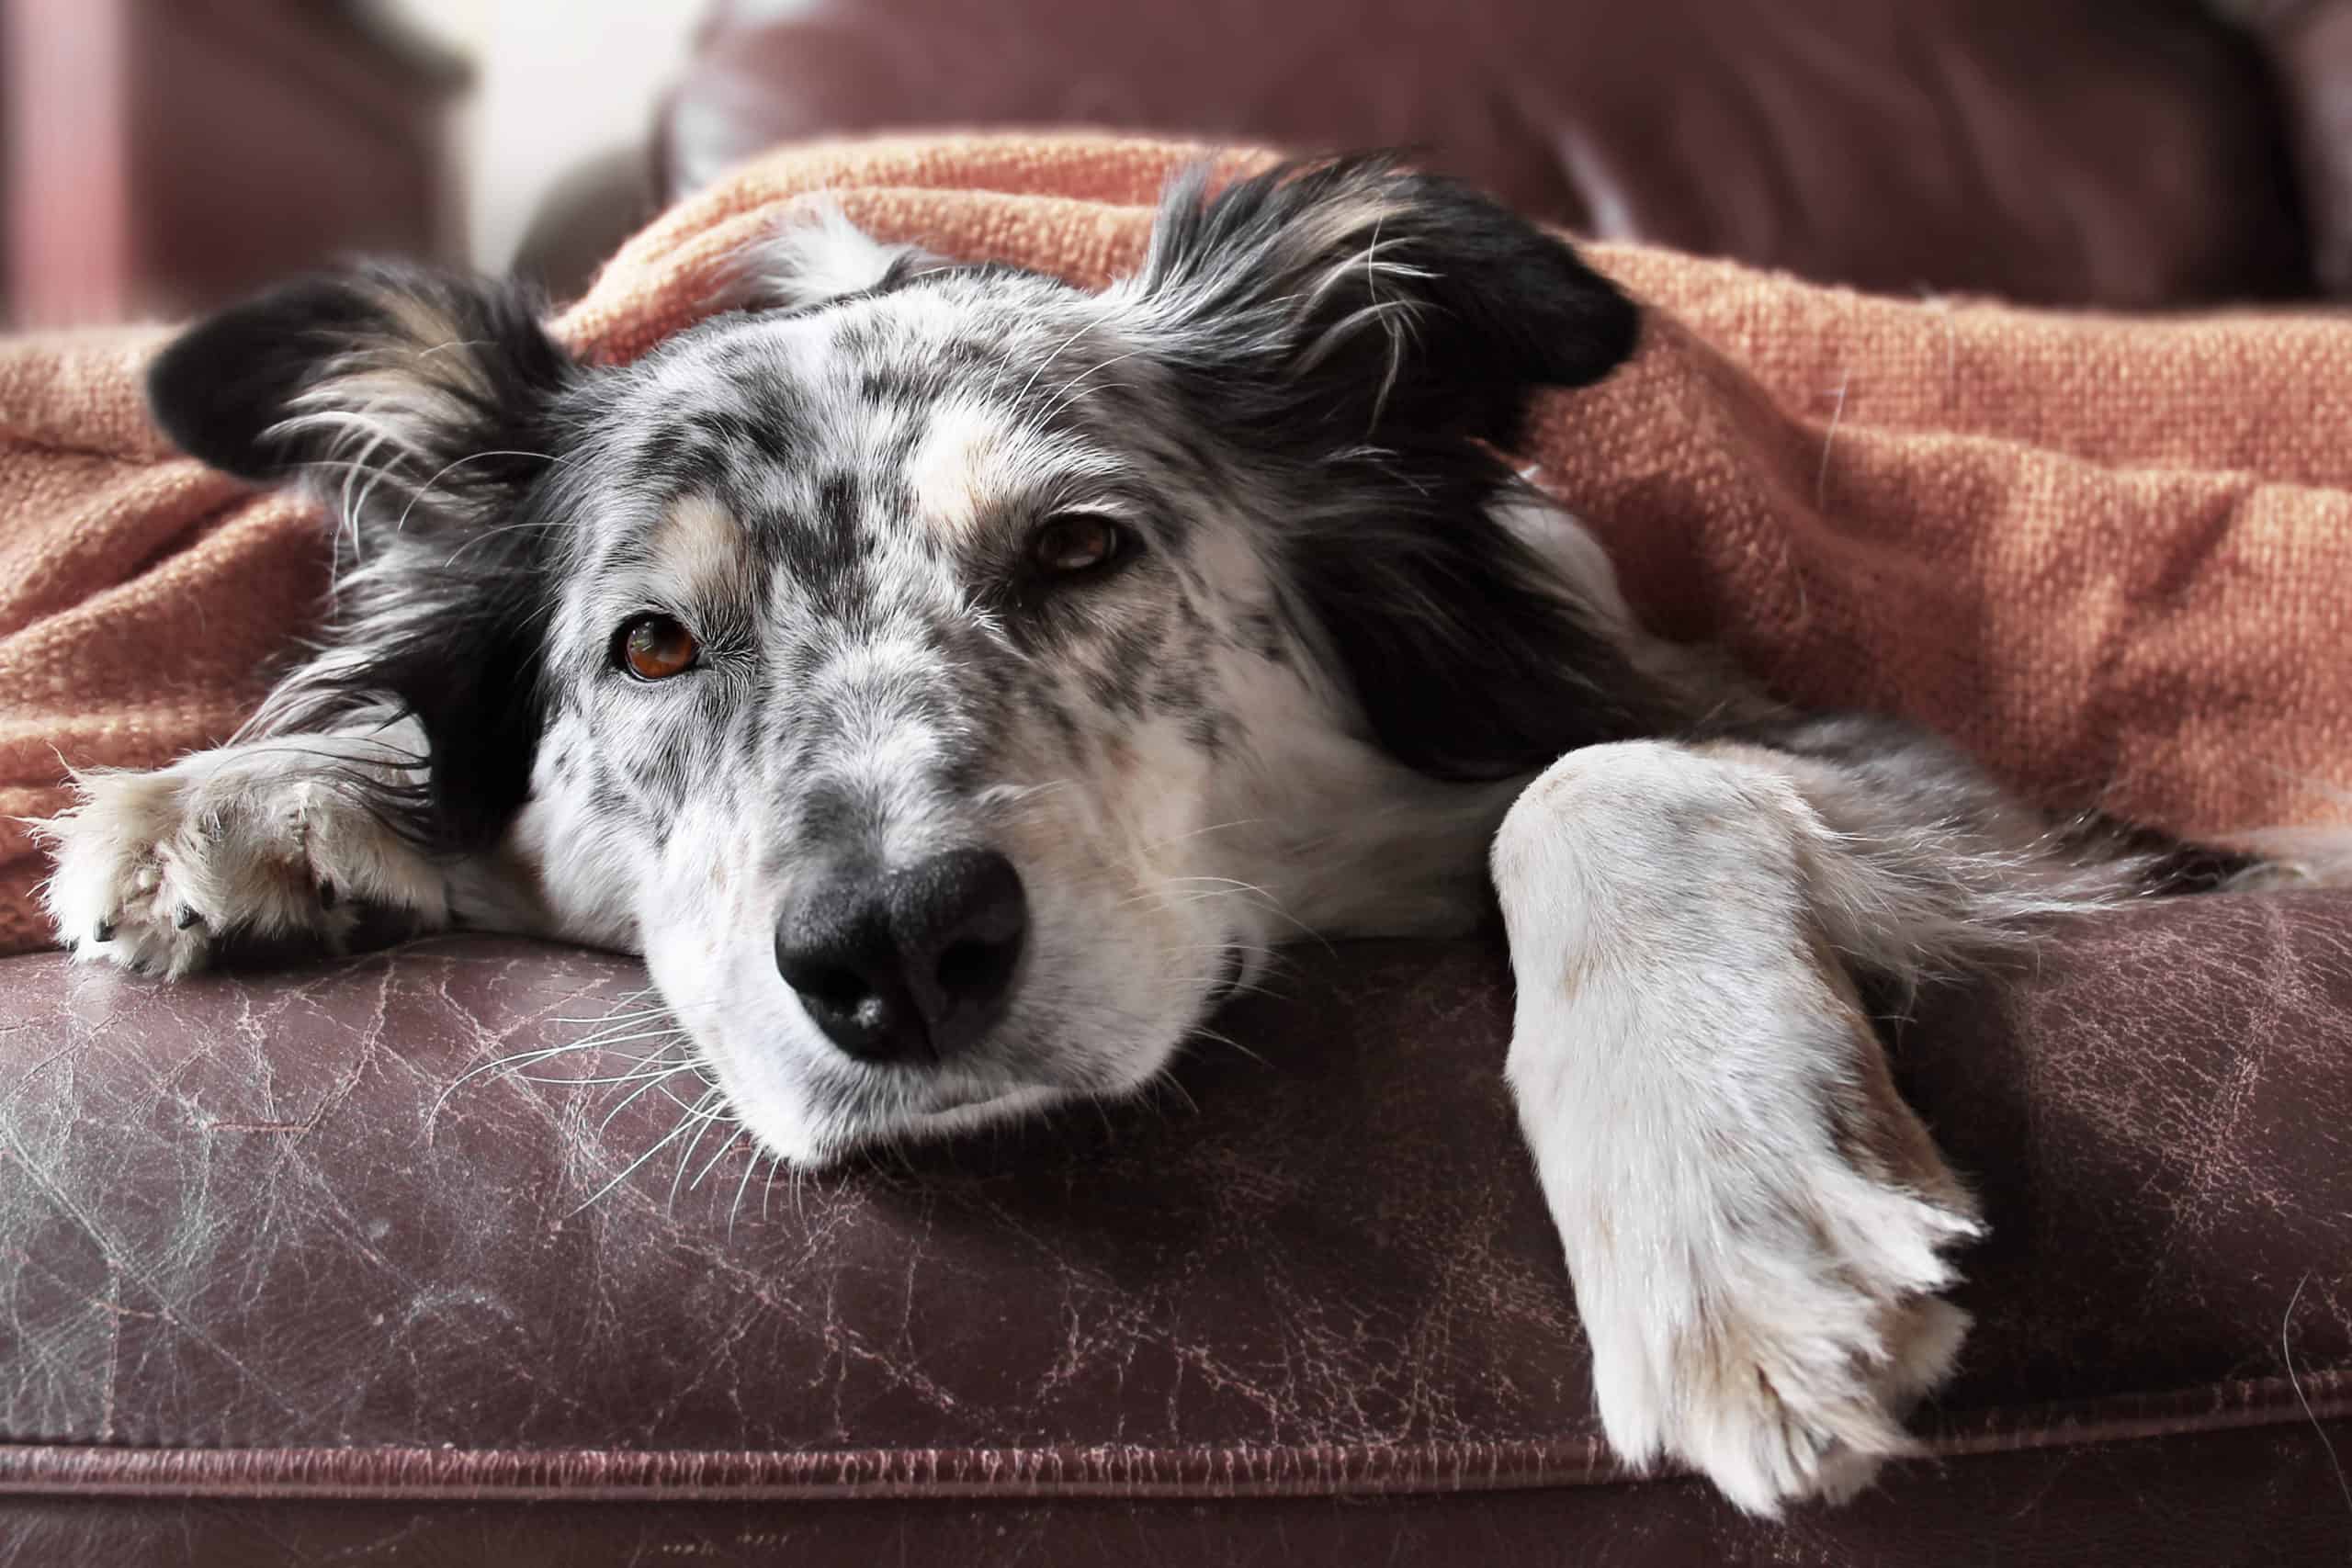 Do dogs sleep when they’re bored?